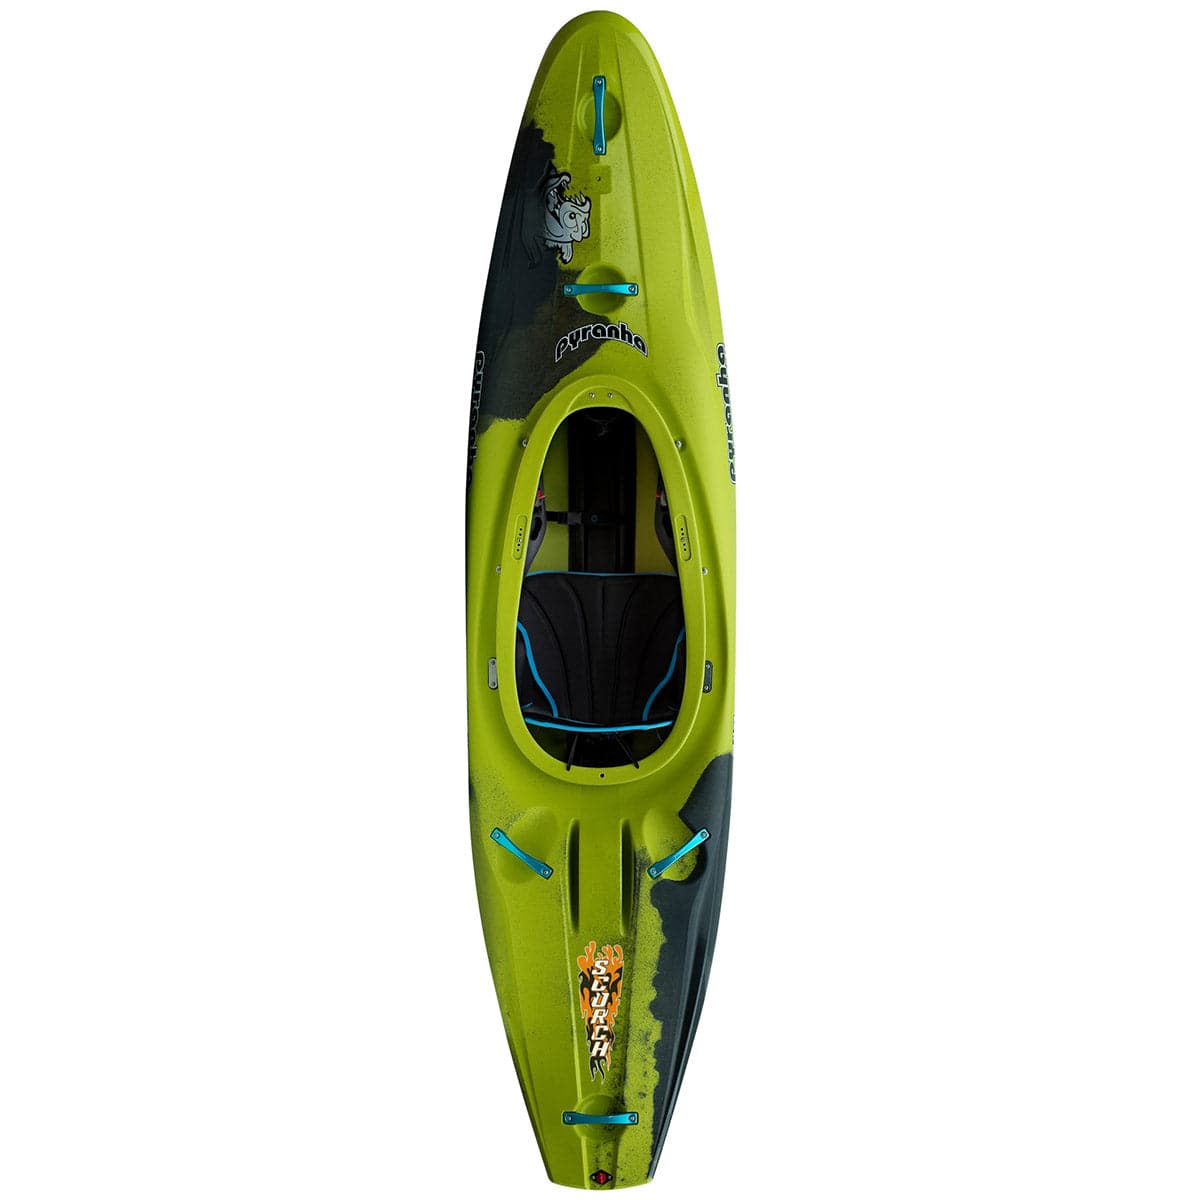 Featuring the Scorch creek boat, river runner kayak manufactured by Pyranha shown here from a second angle.